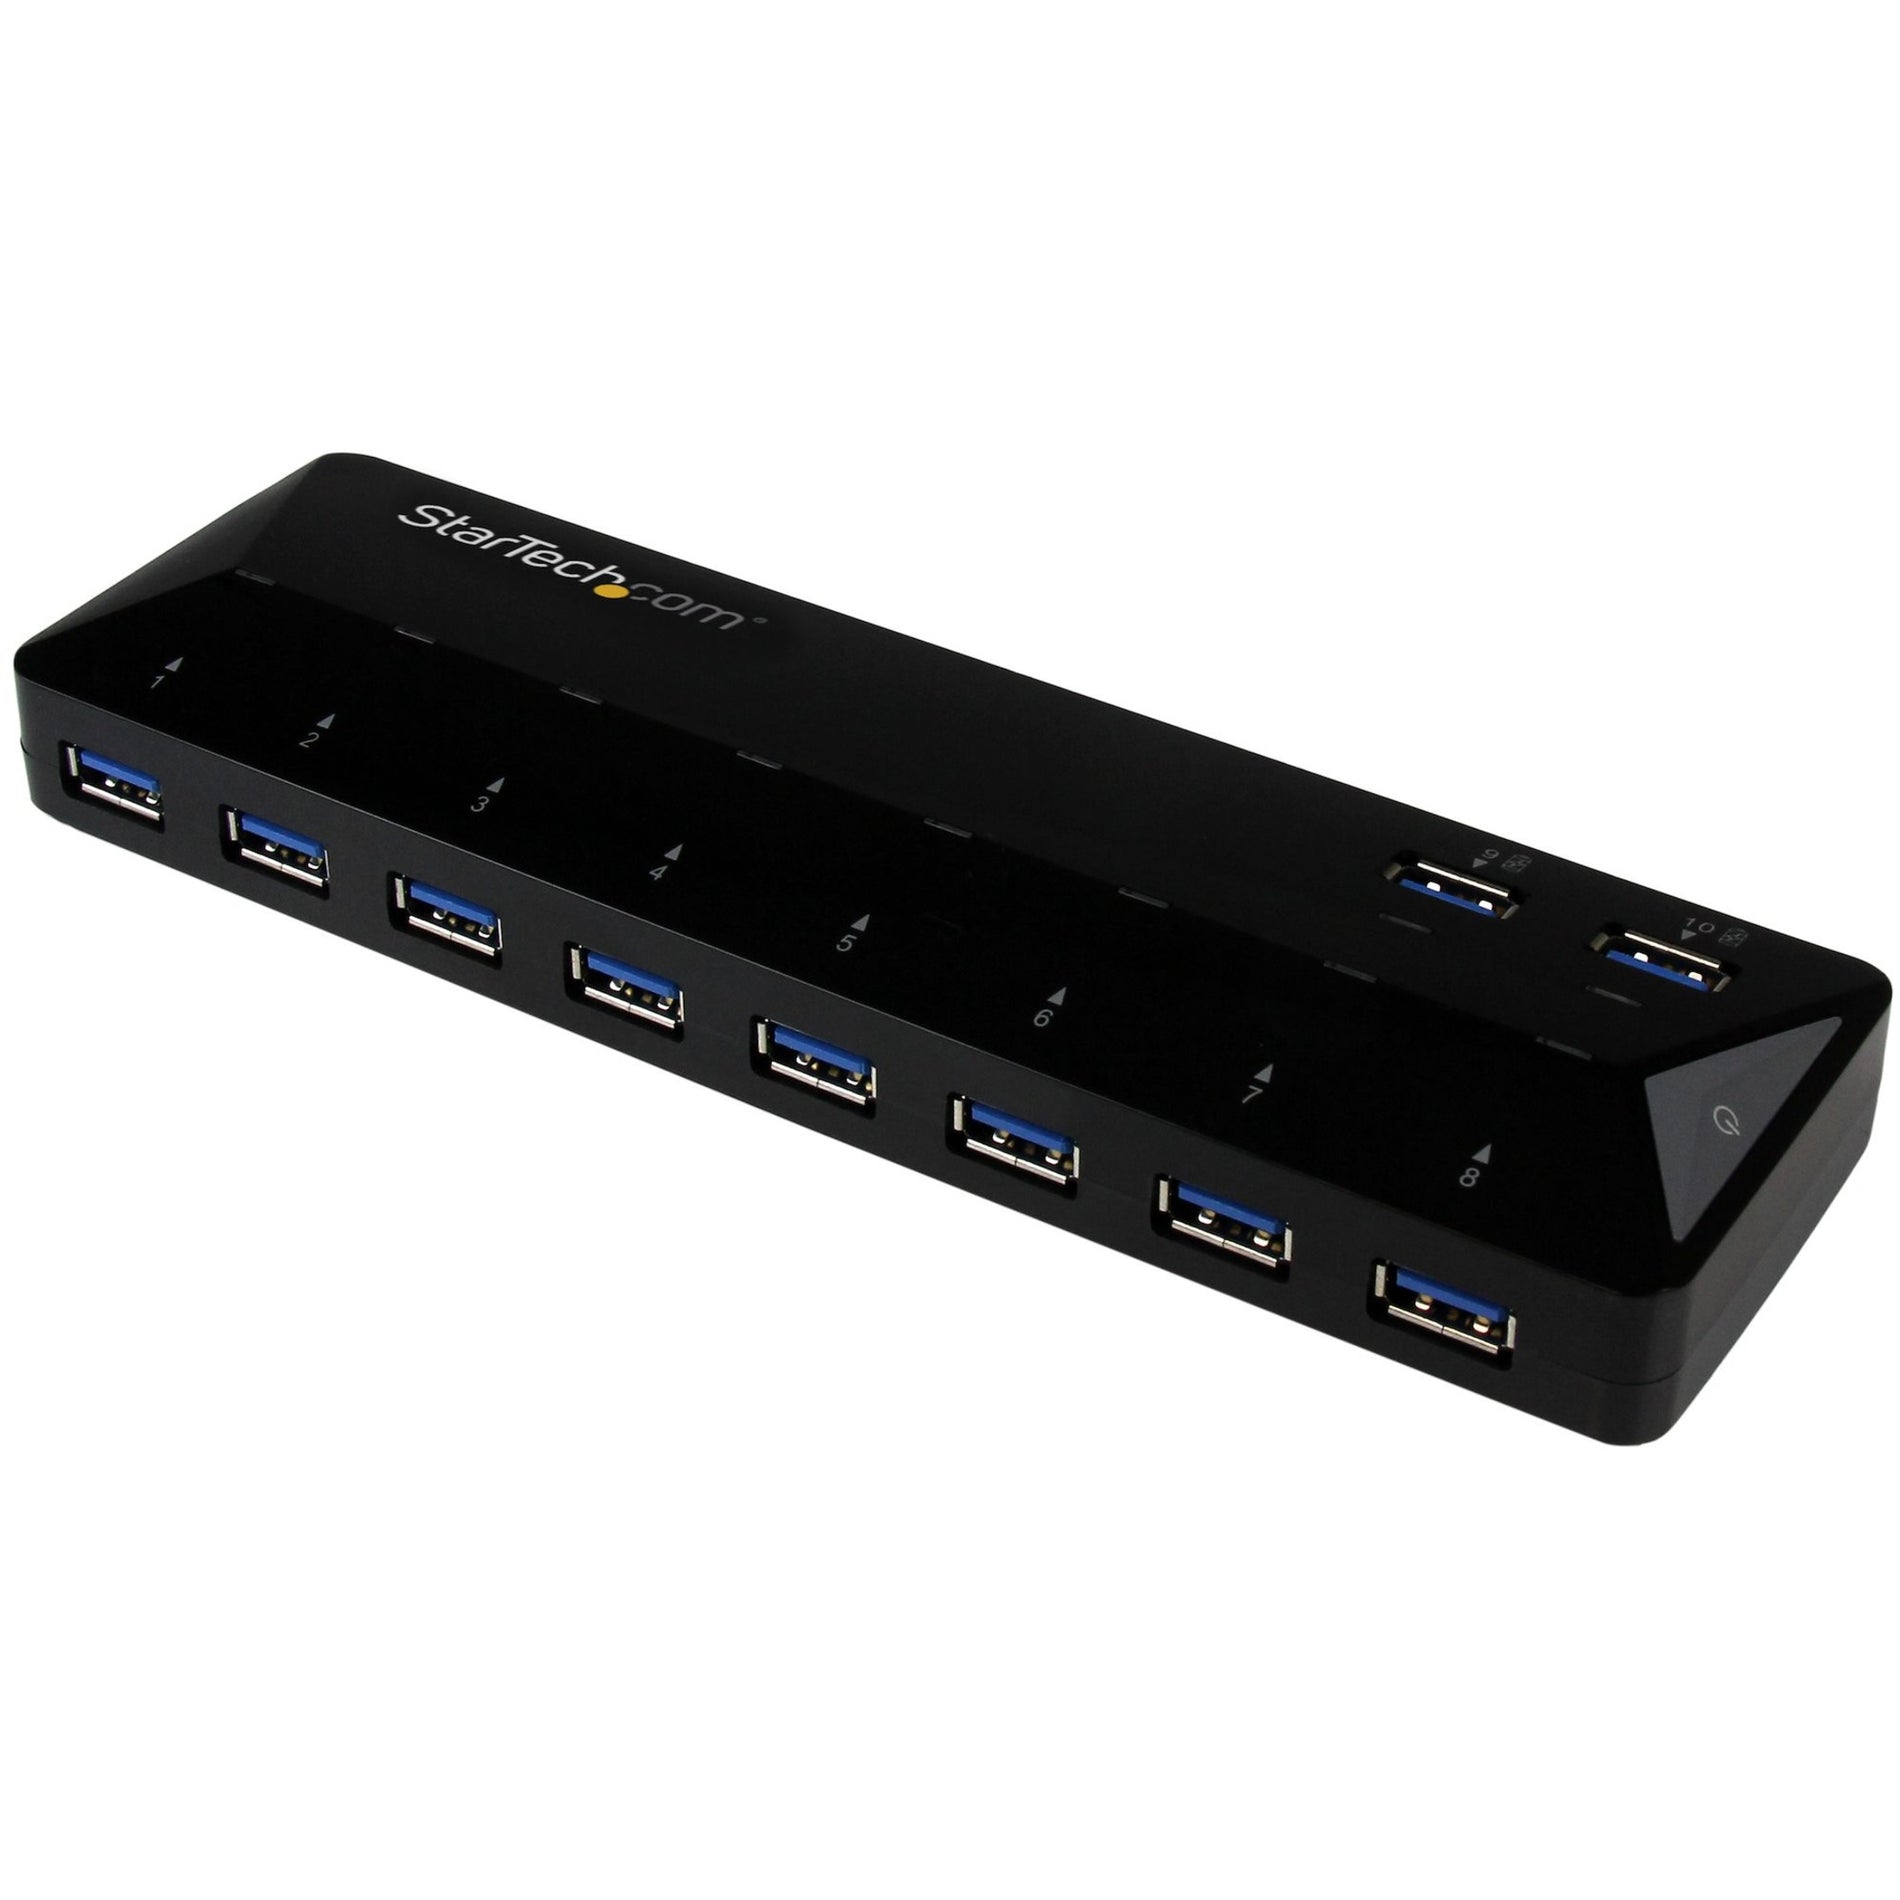 StarTech.com ST103008U2C 10-Port USB 3.0 Hub with Charge and Sync Ports Fast-Charging Station Black